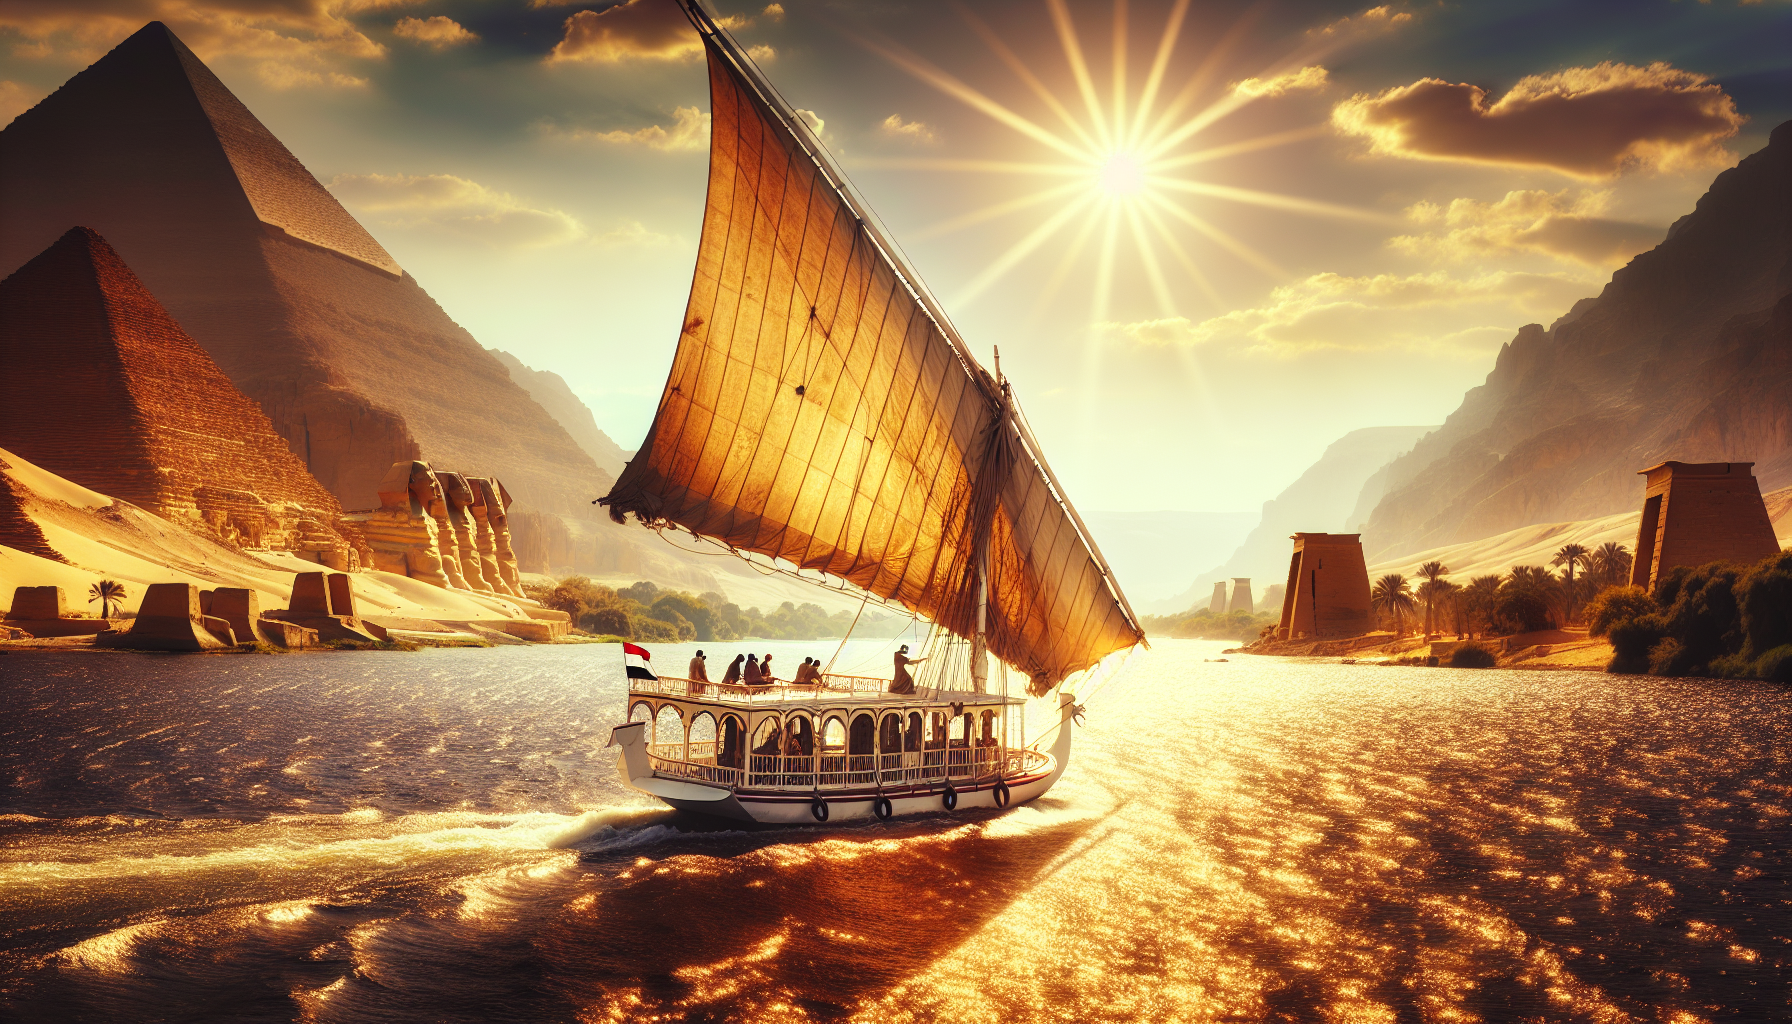 discover the allure of traditional felucca sailing and find out why you should experience it firsthand. plan your unforgettable adventure now!